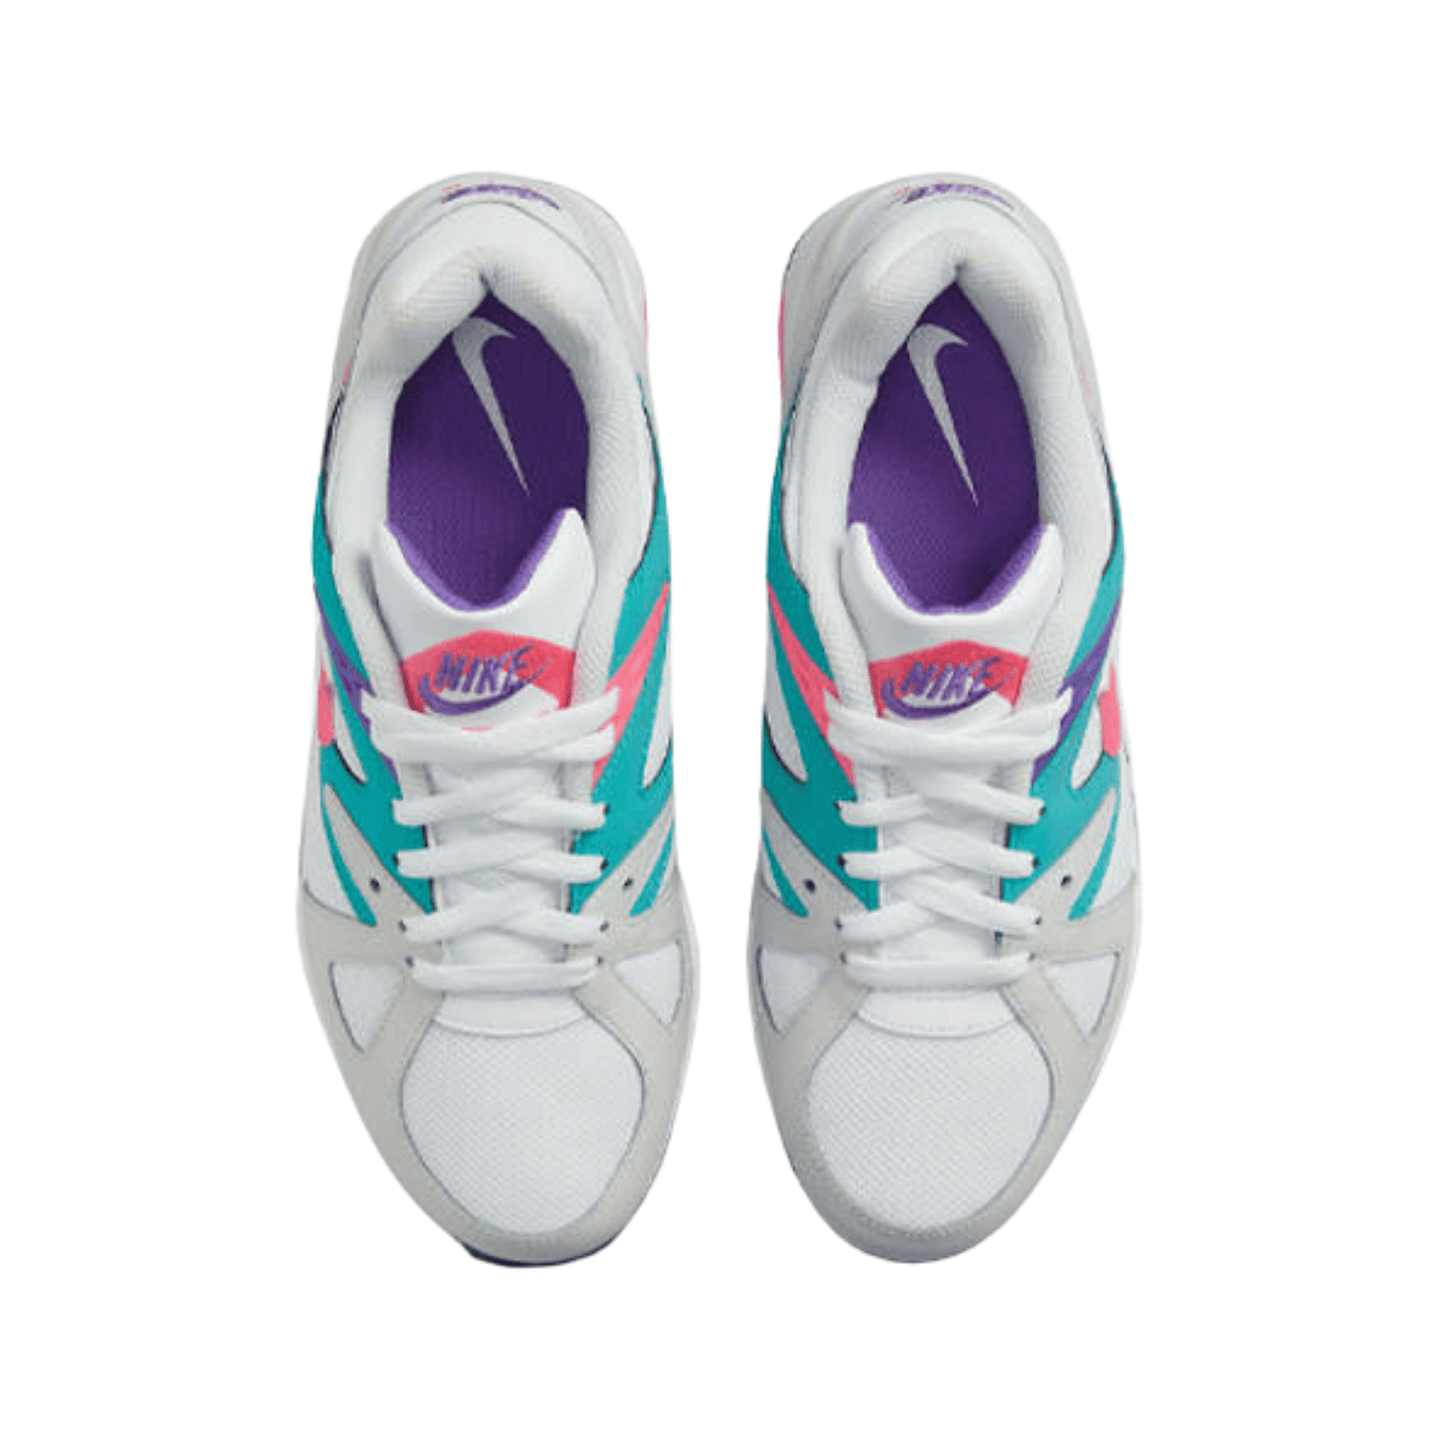 Nike Air Structure Triax 91 WMNS 'White Teal Pink' - FRESNEAKERS